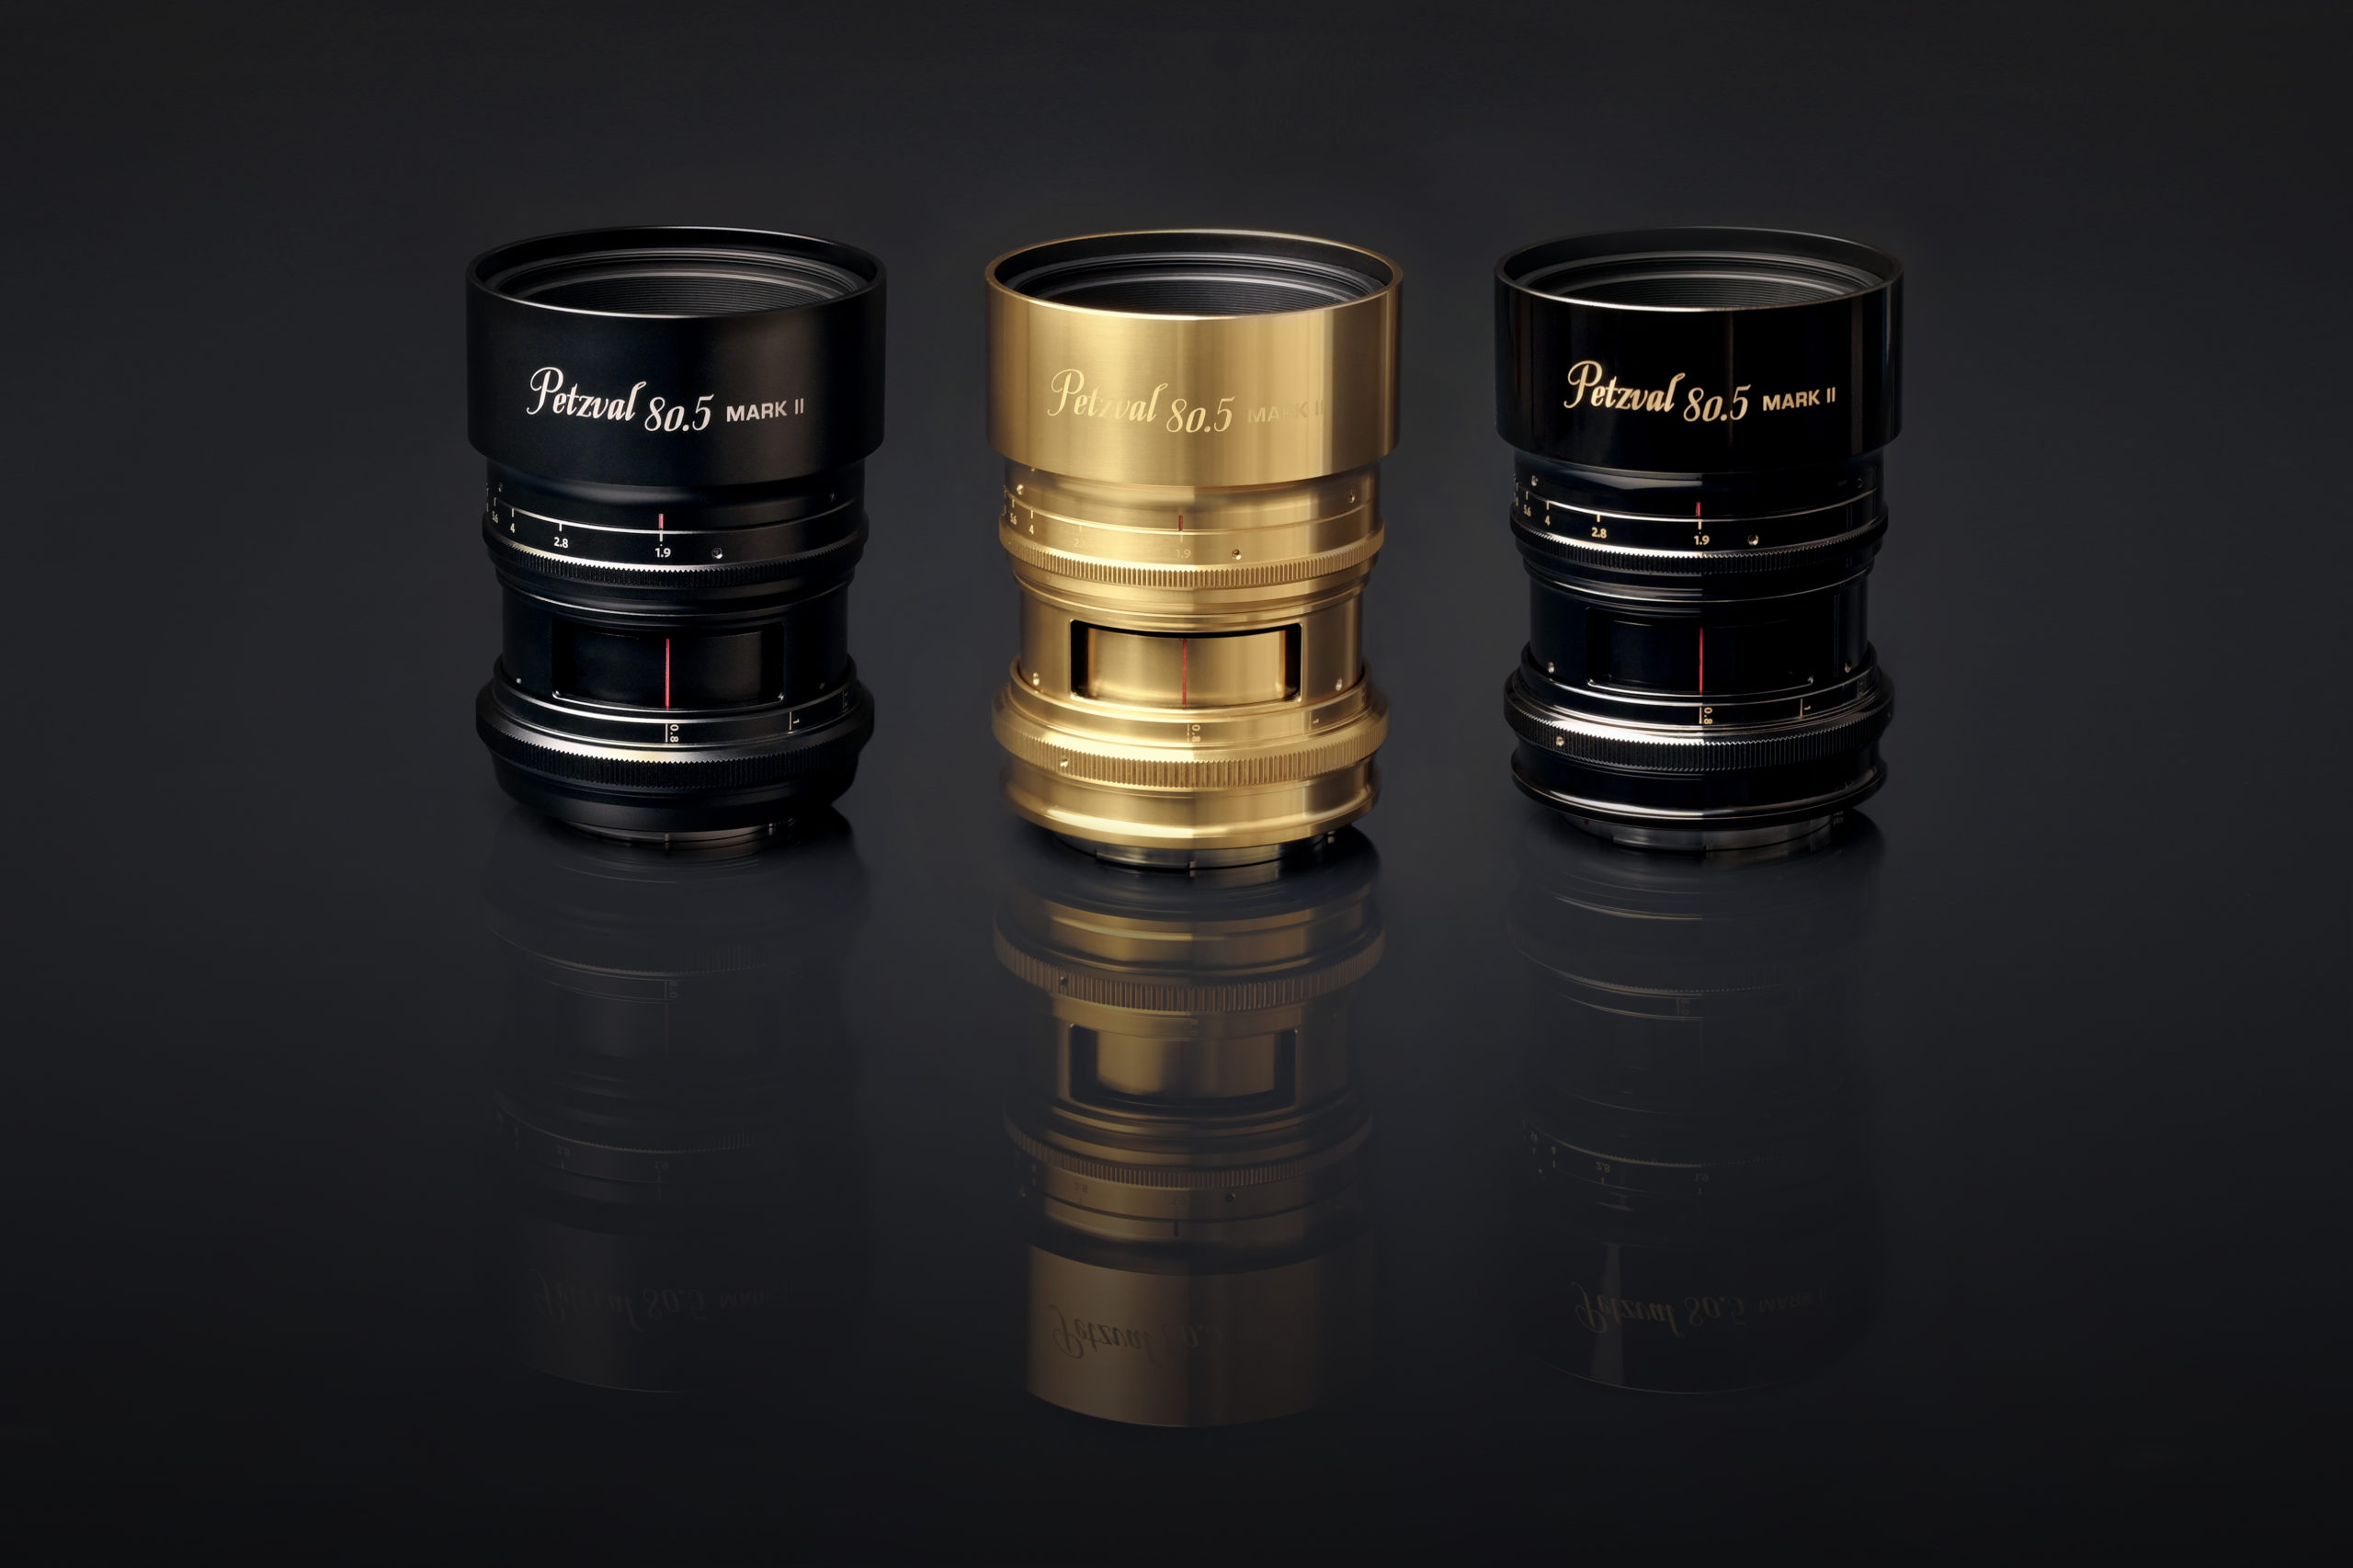 New Lomography Petzval 80.5 MK II Now Also for Filmmakers